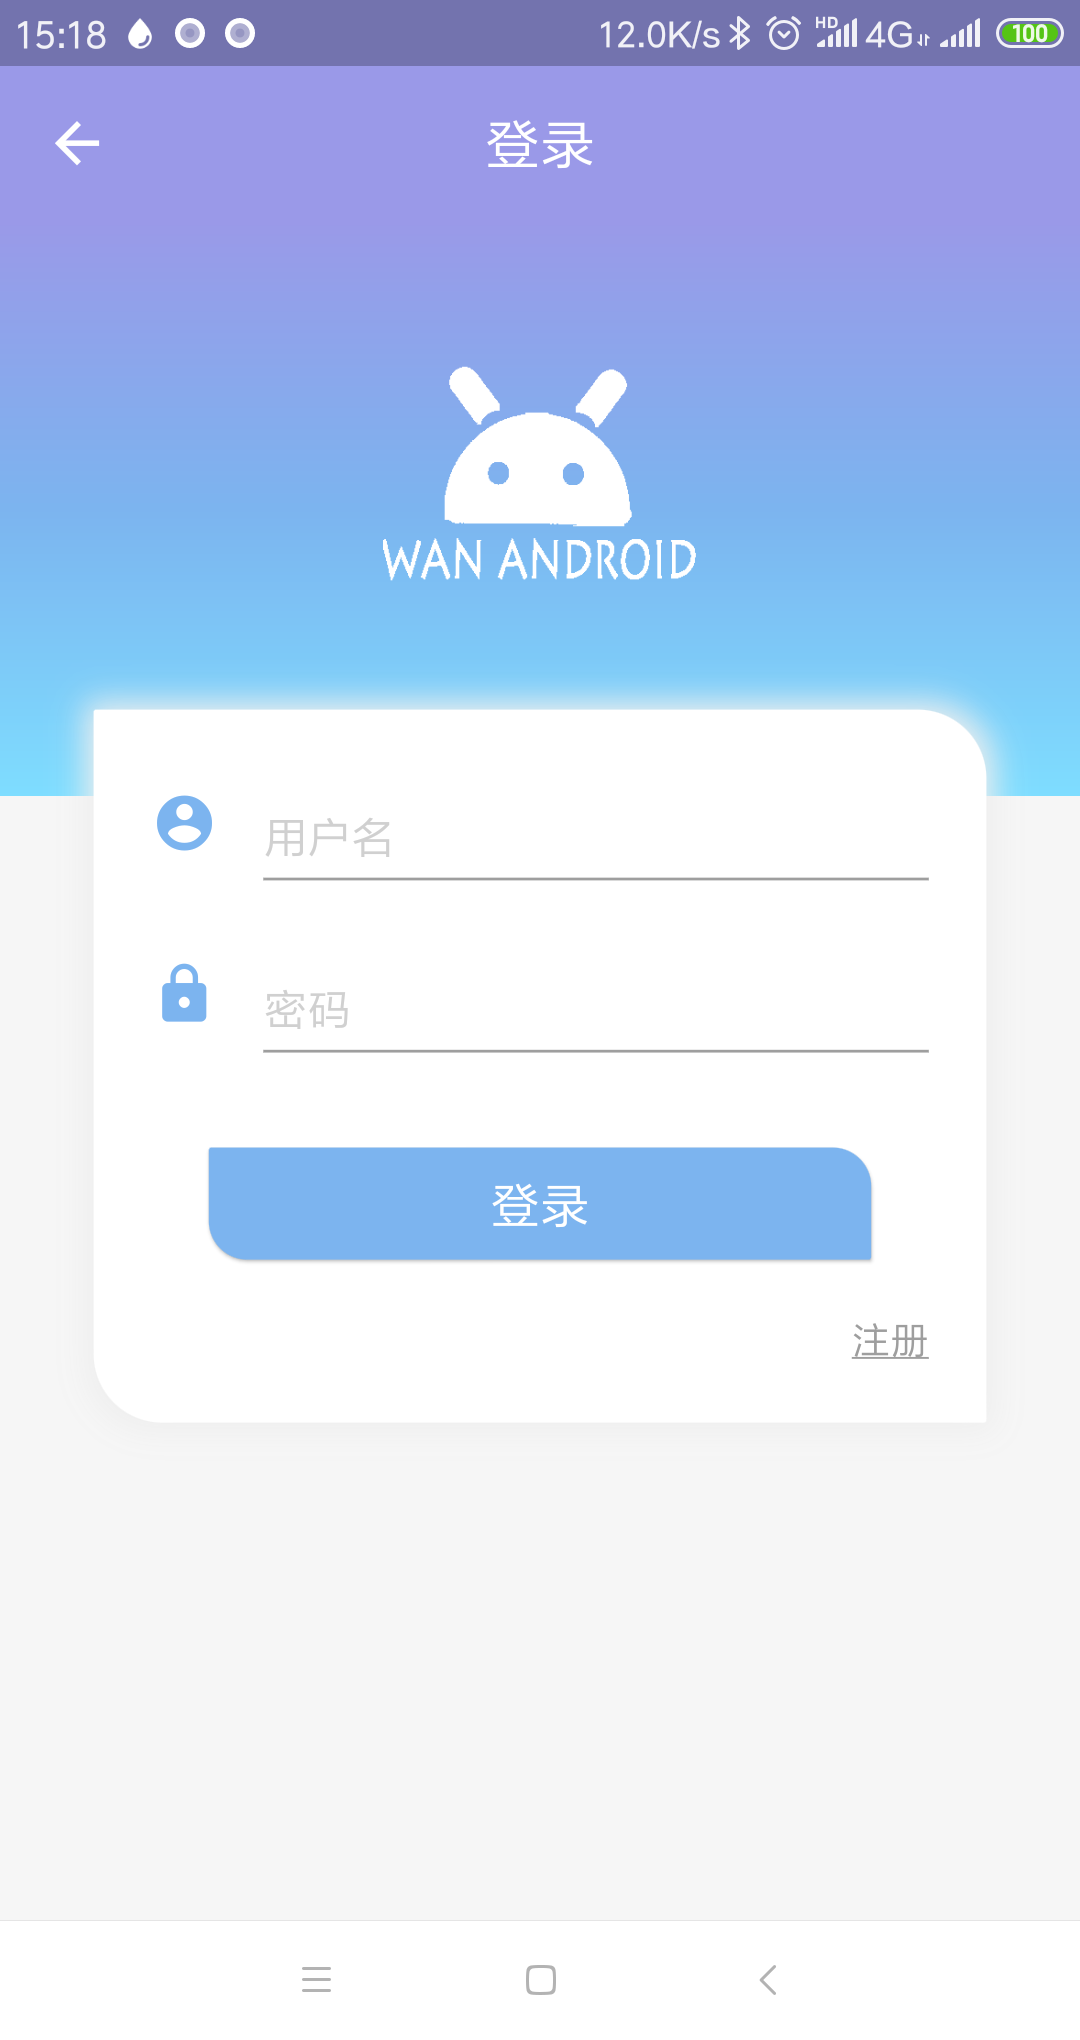 Screenshot_2019-08-04-15-18-11-188_ccy.wanandroid.png